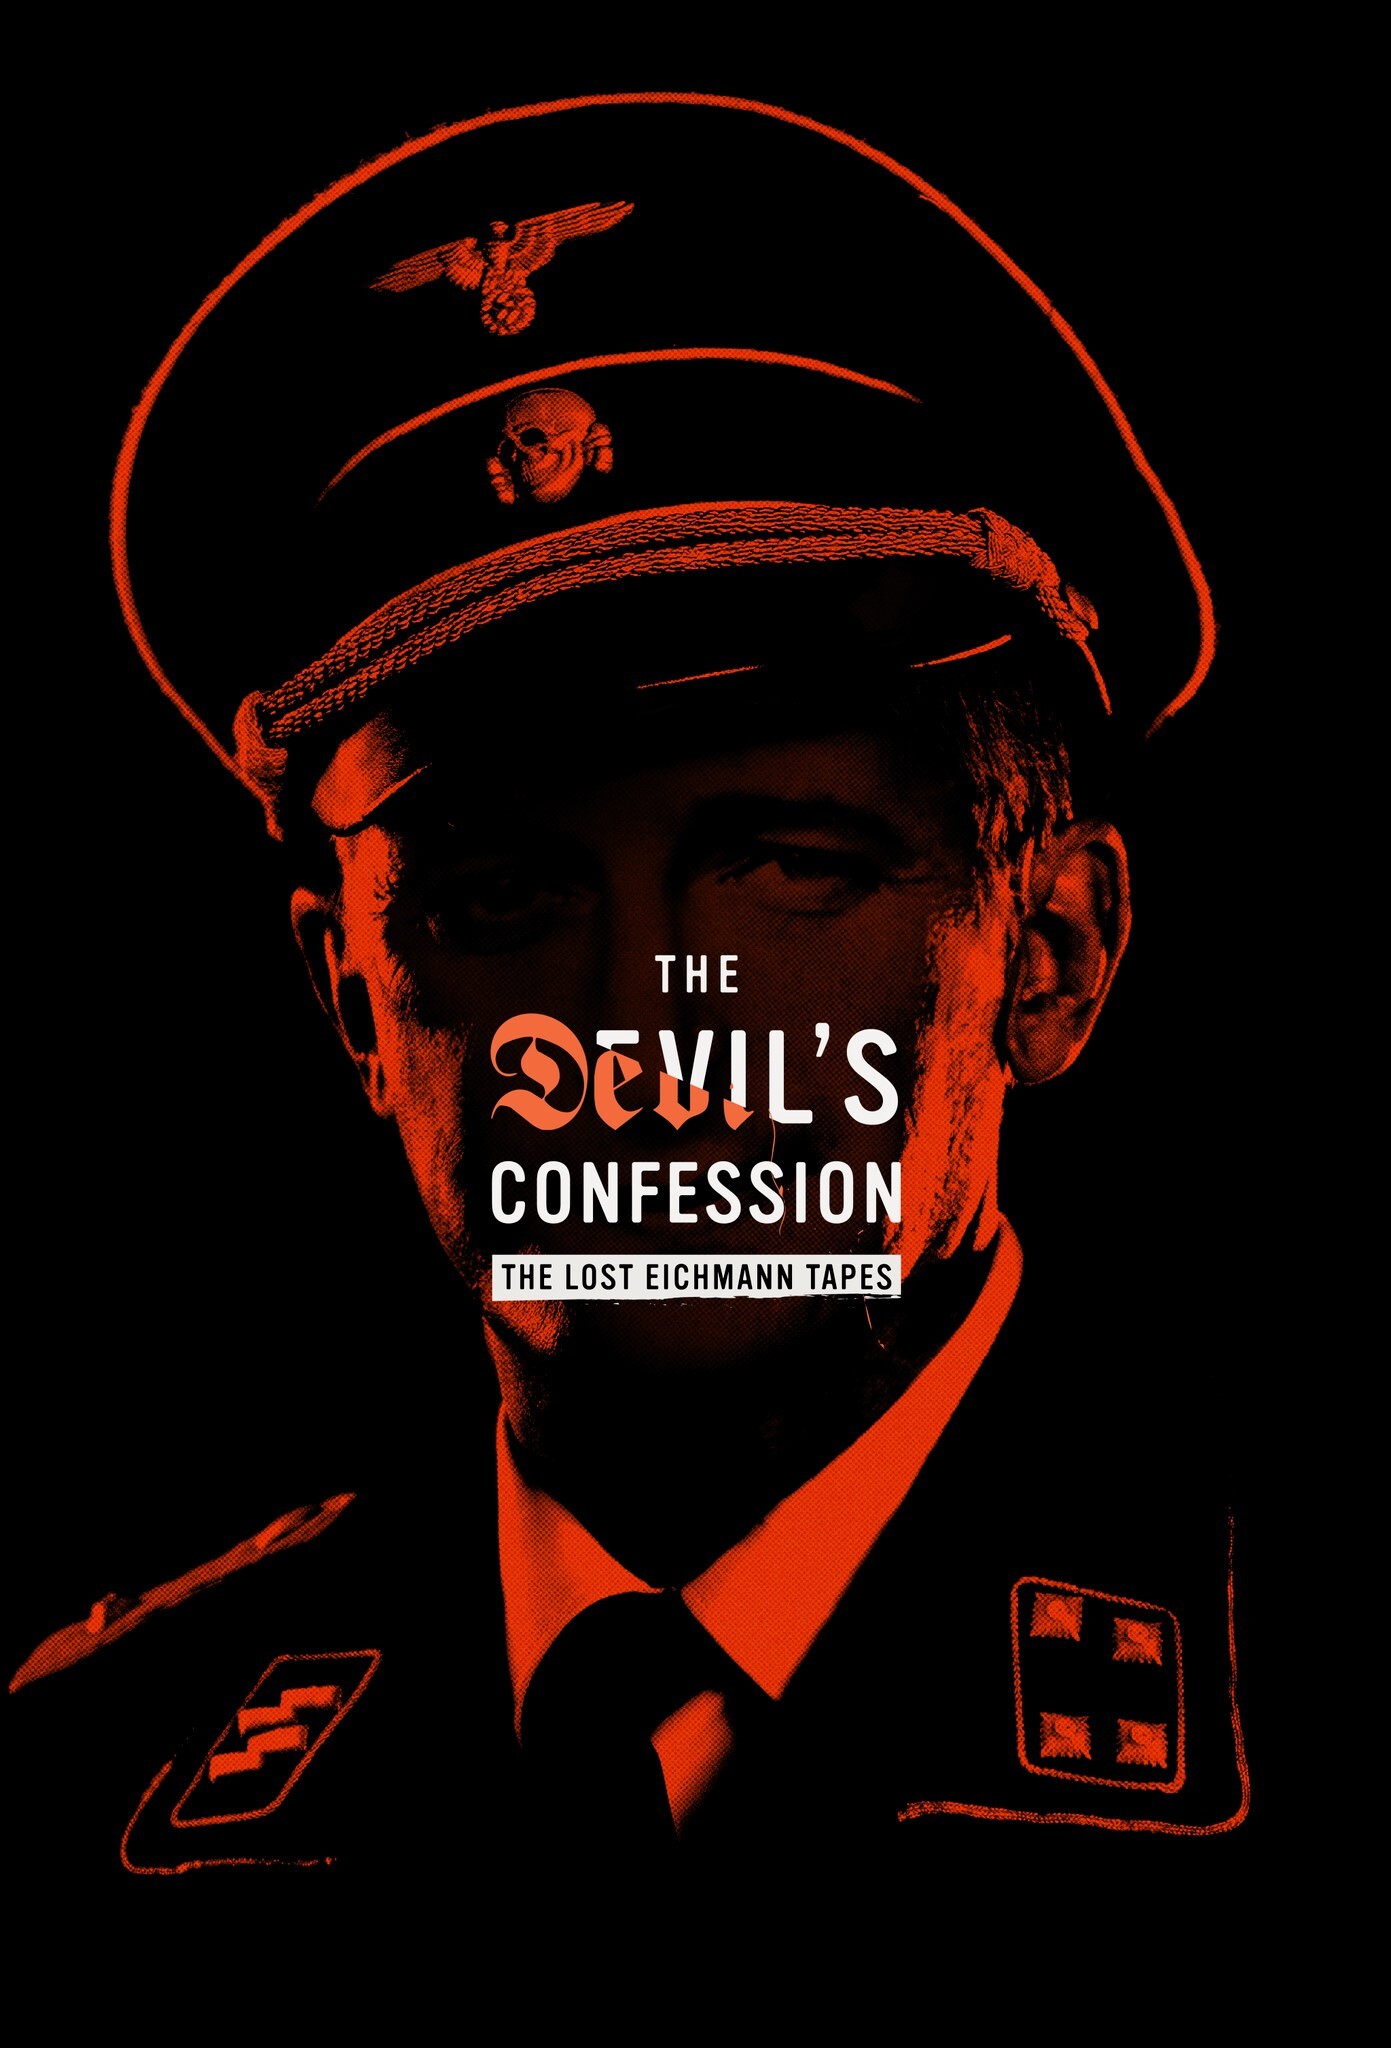 The Devil’s Confession: The Lost Eichmann Tapes packshot